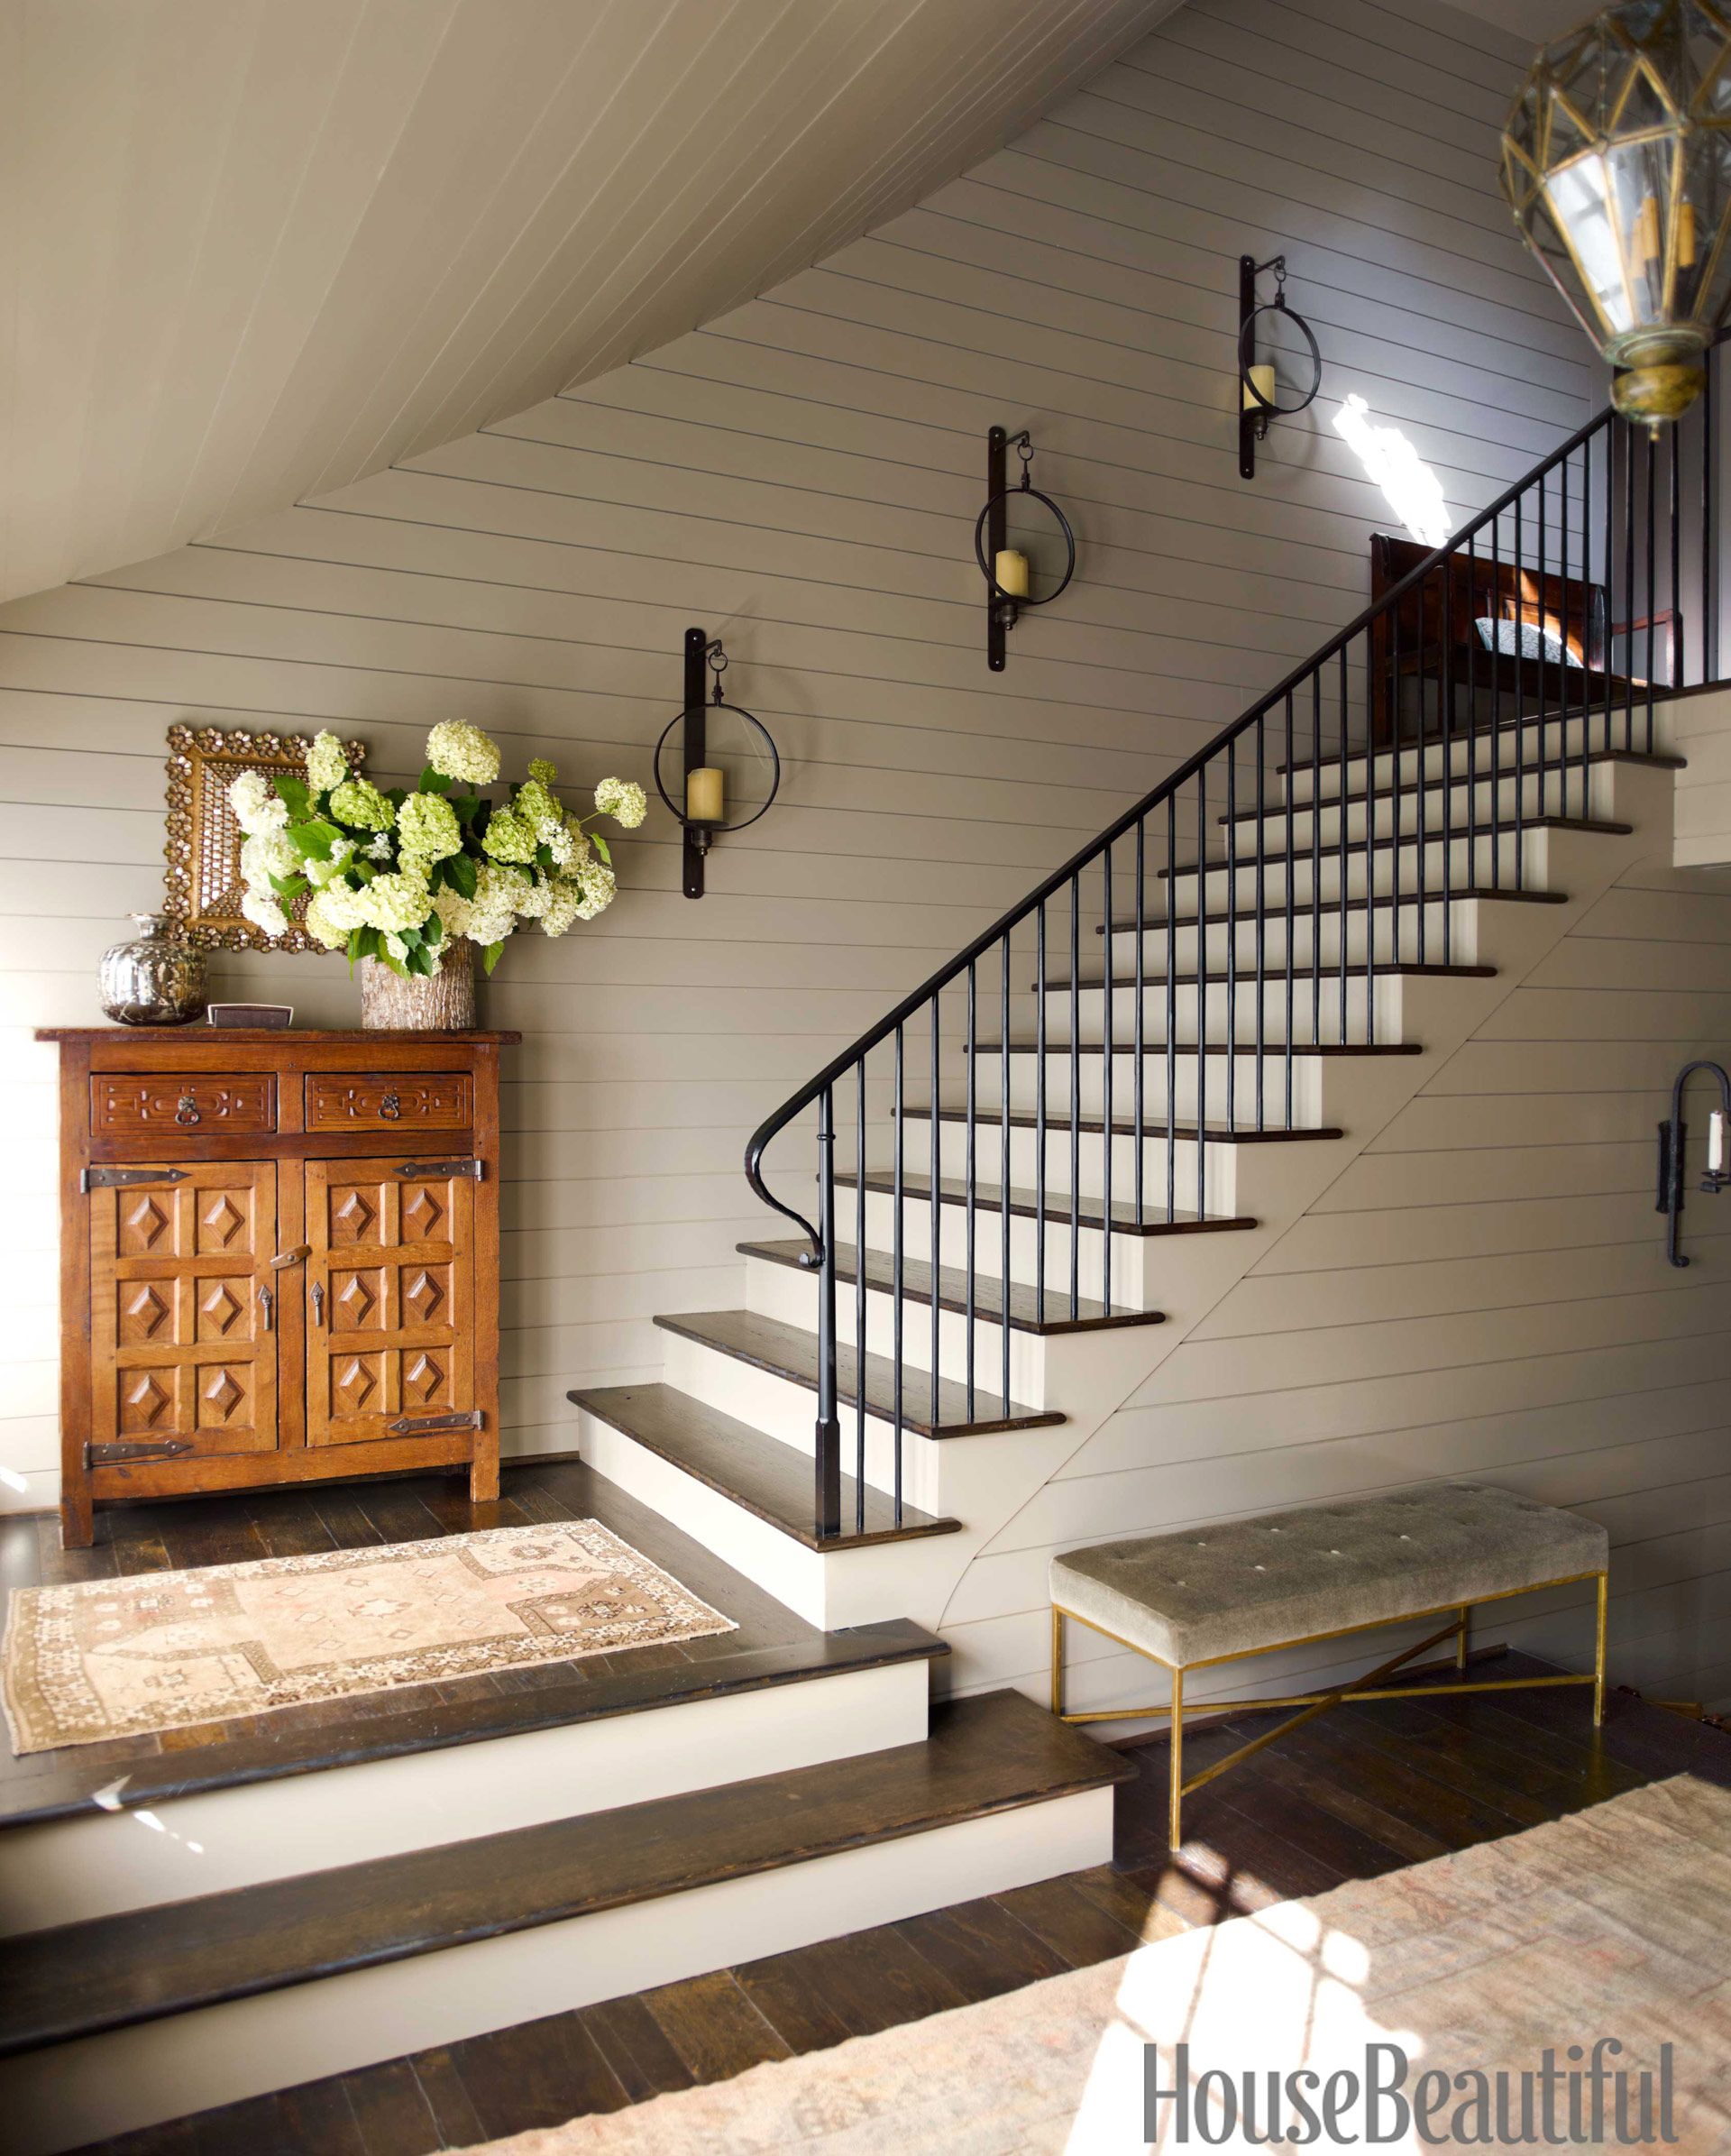 Shaker Style Staircase House Beautiful Pinterest Favorite Pins June 11 14